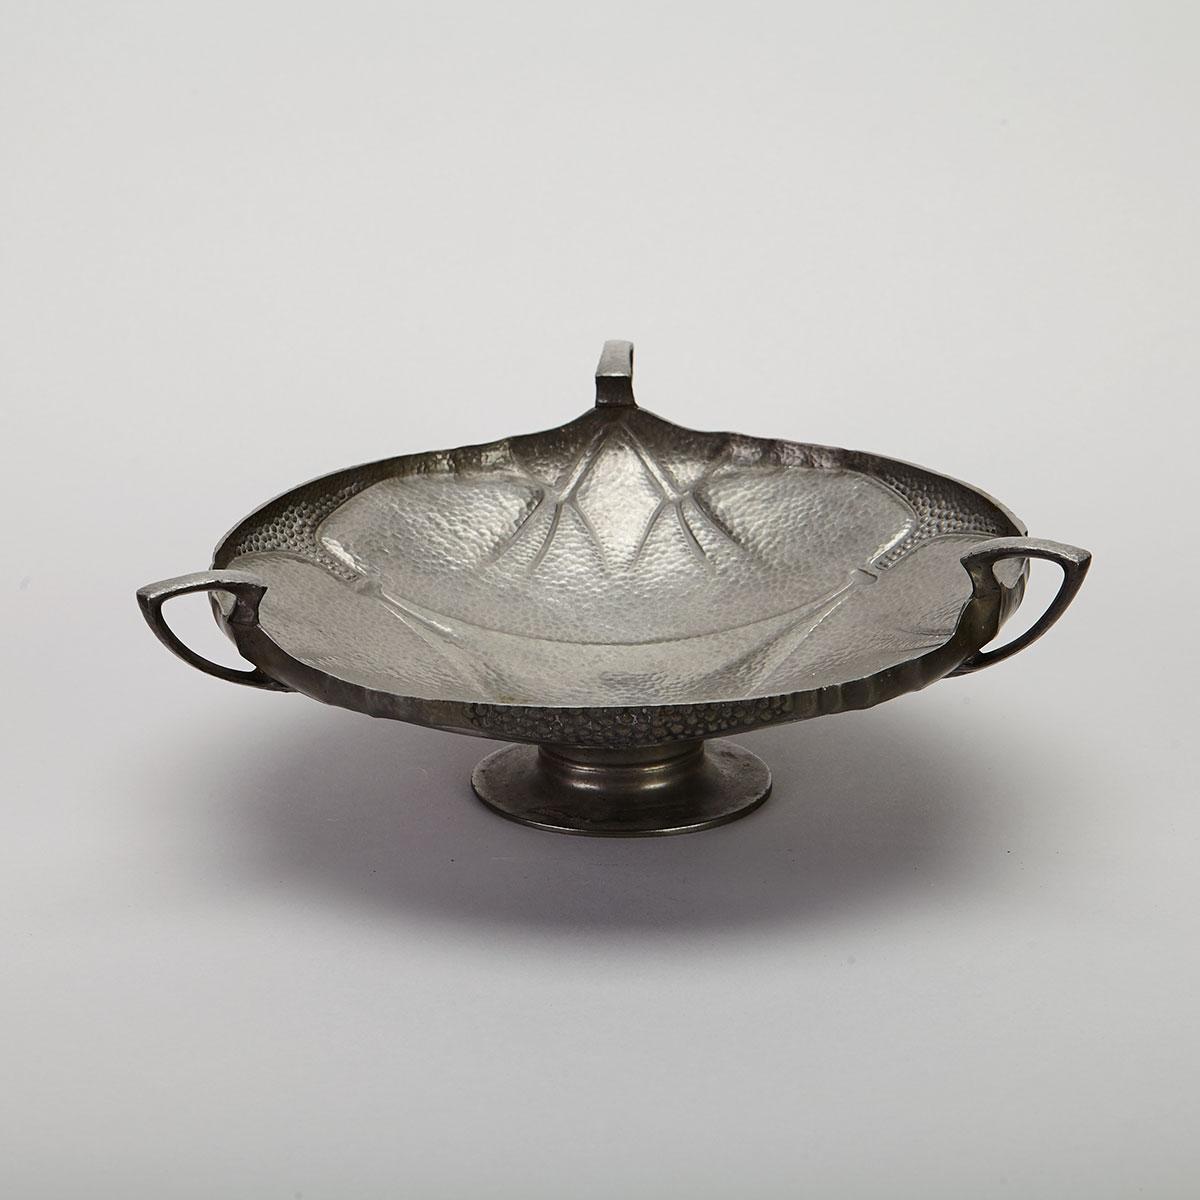 William Hutton & Sons English Hammered Pewter Tazza, c.1900